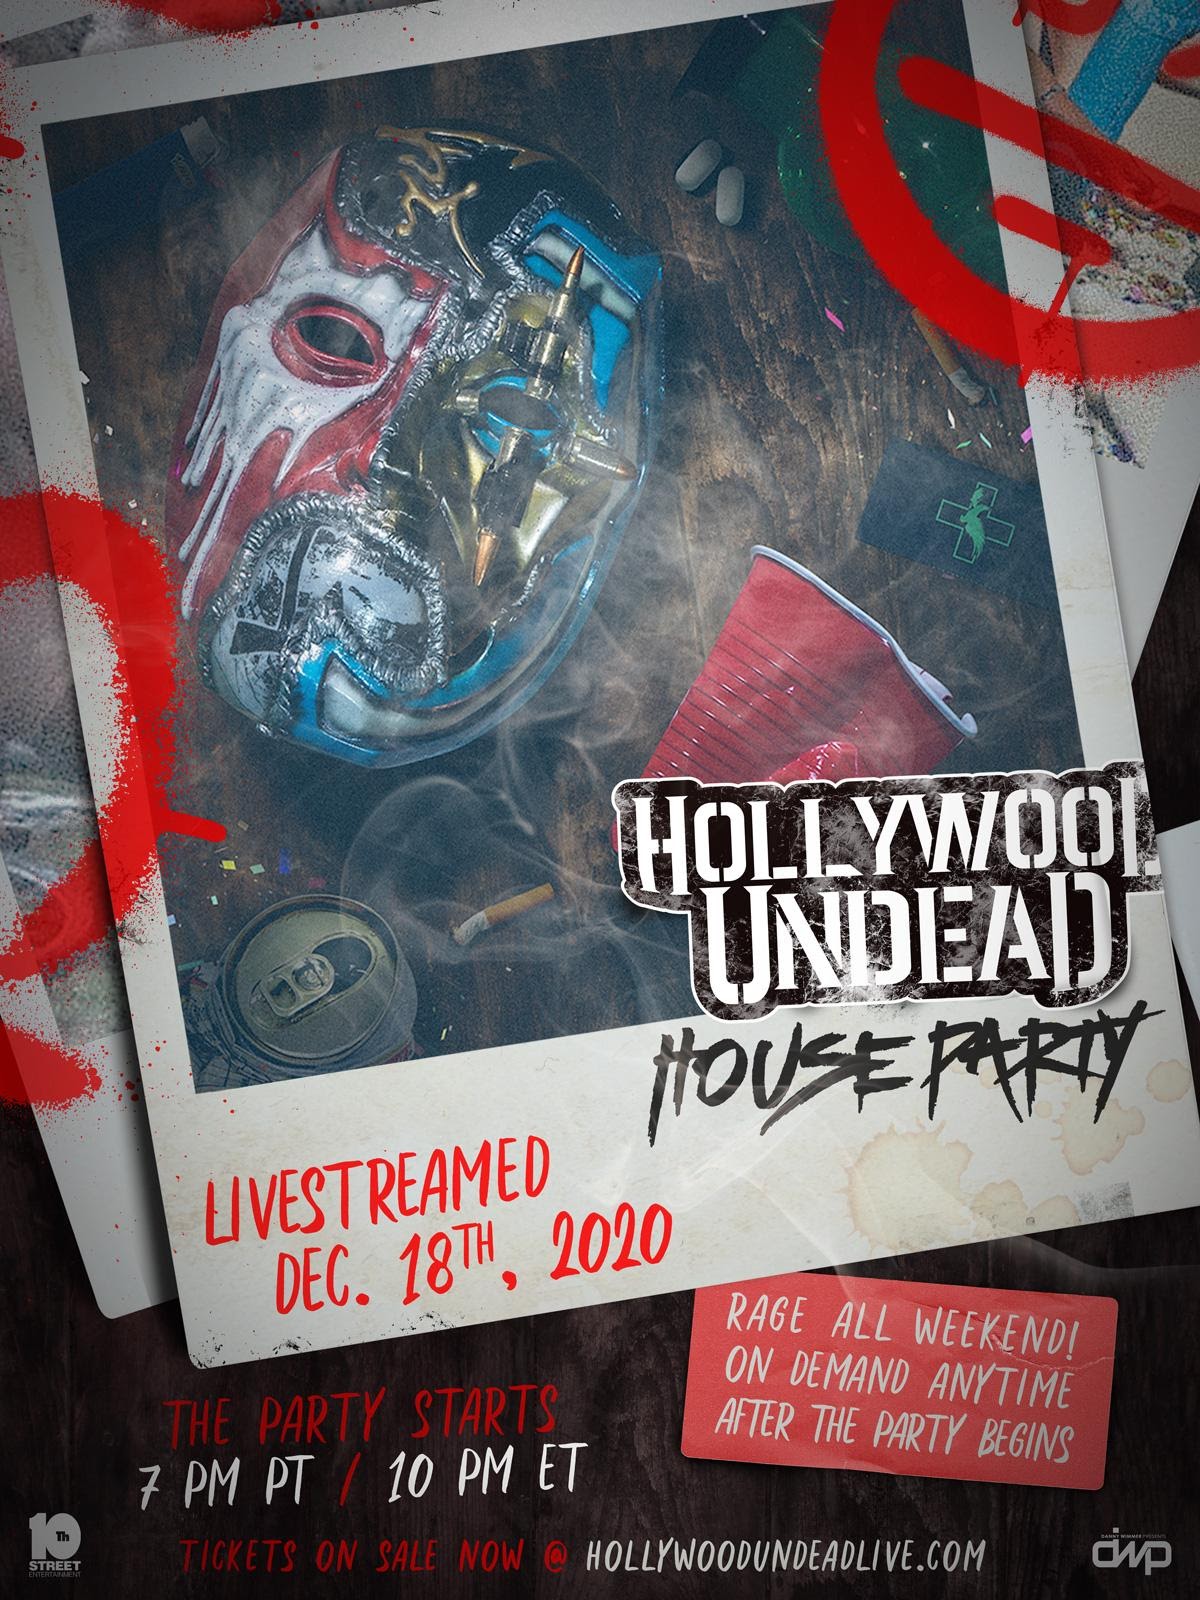 The Hollywood Undead House Party